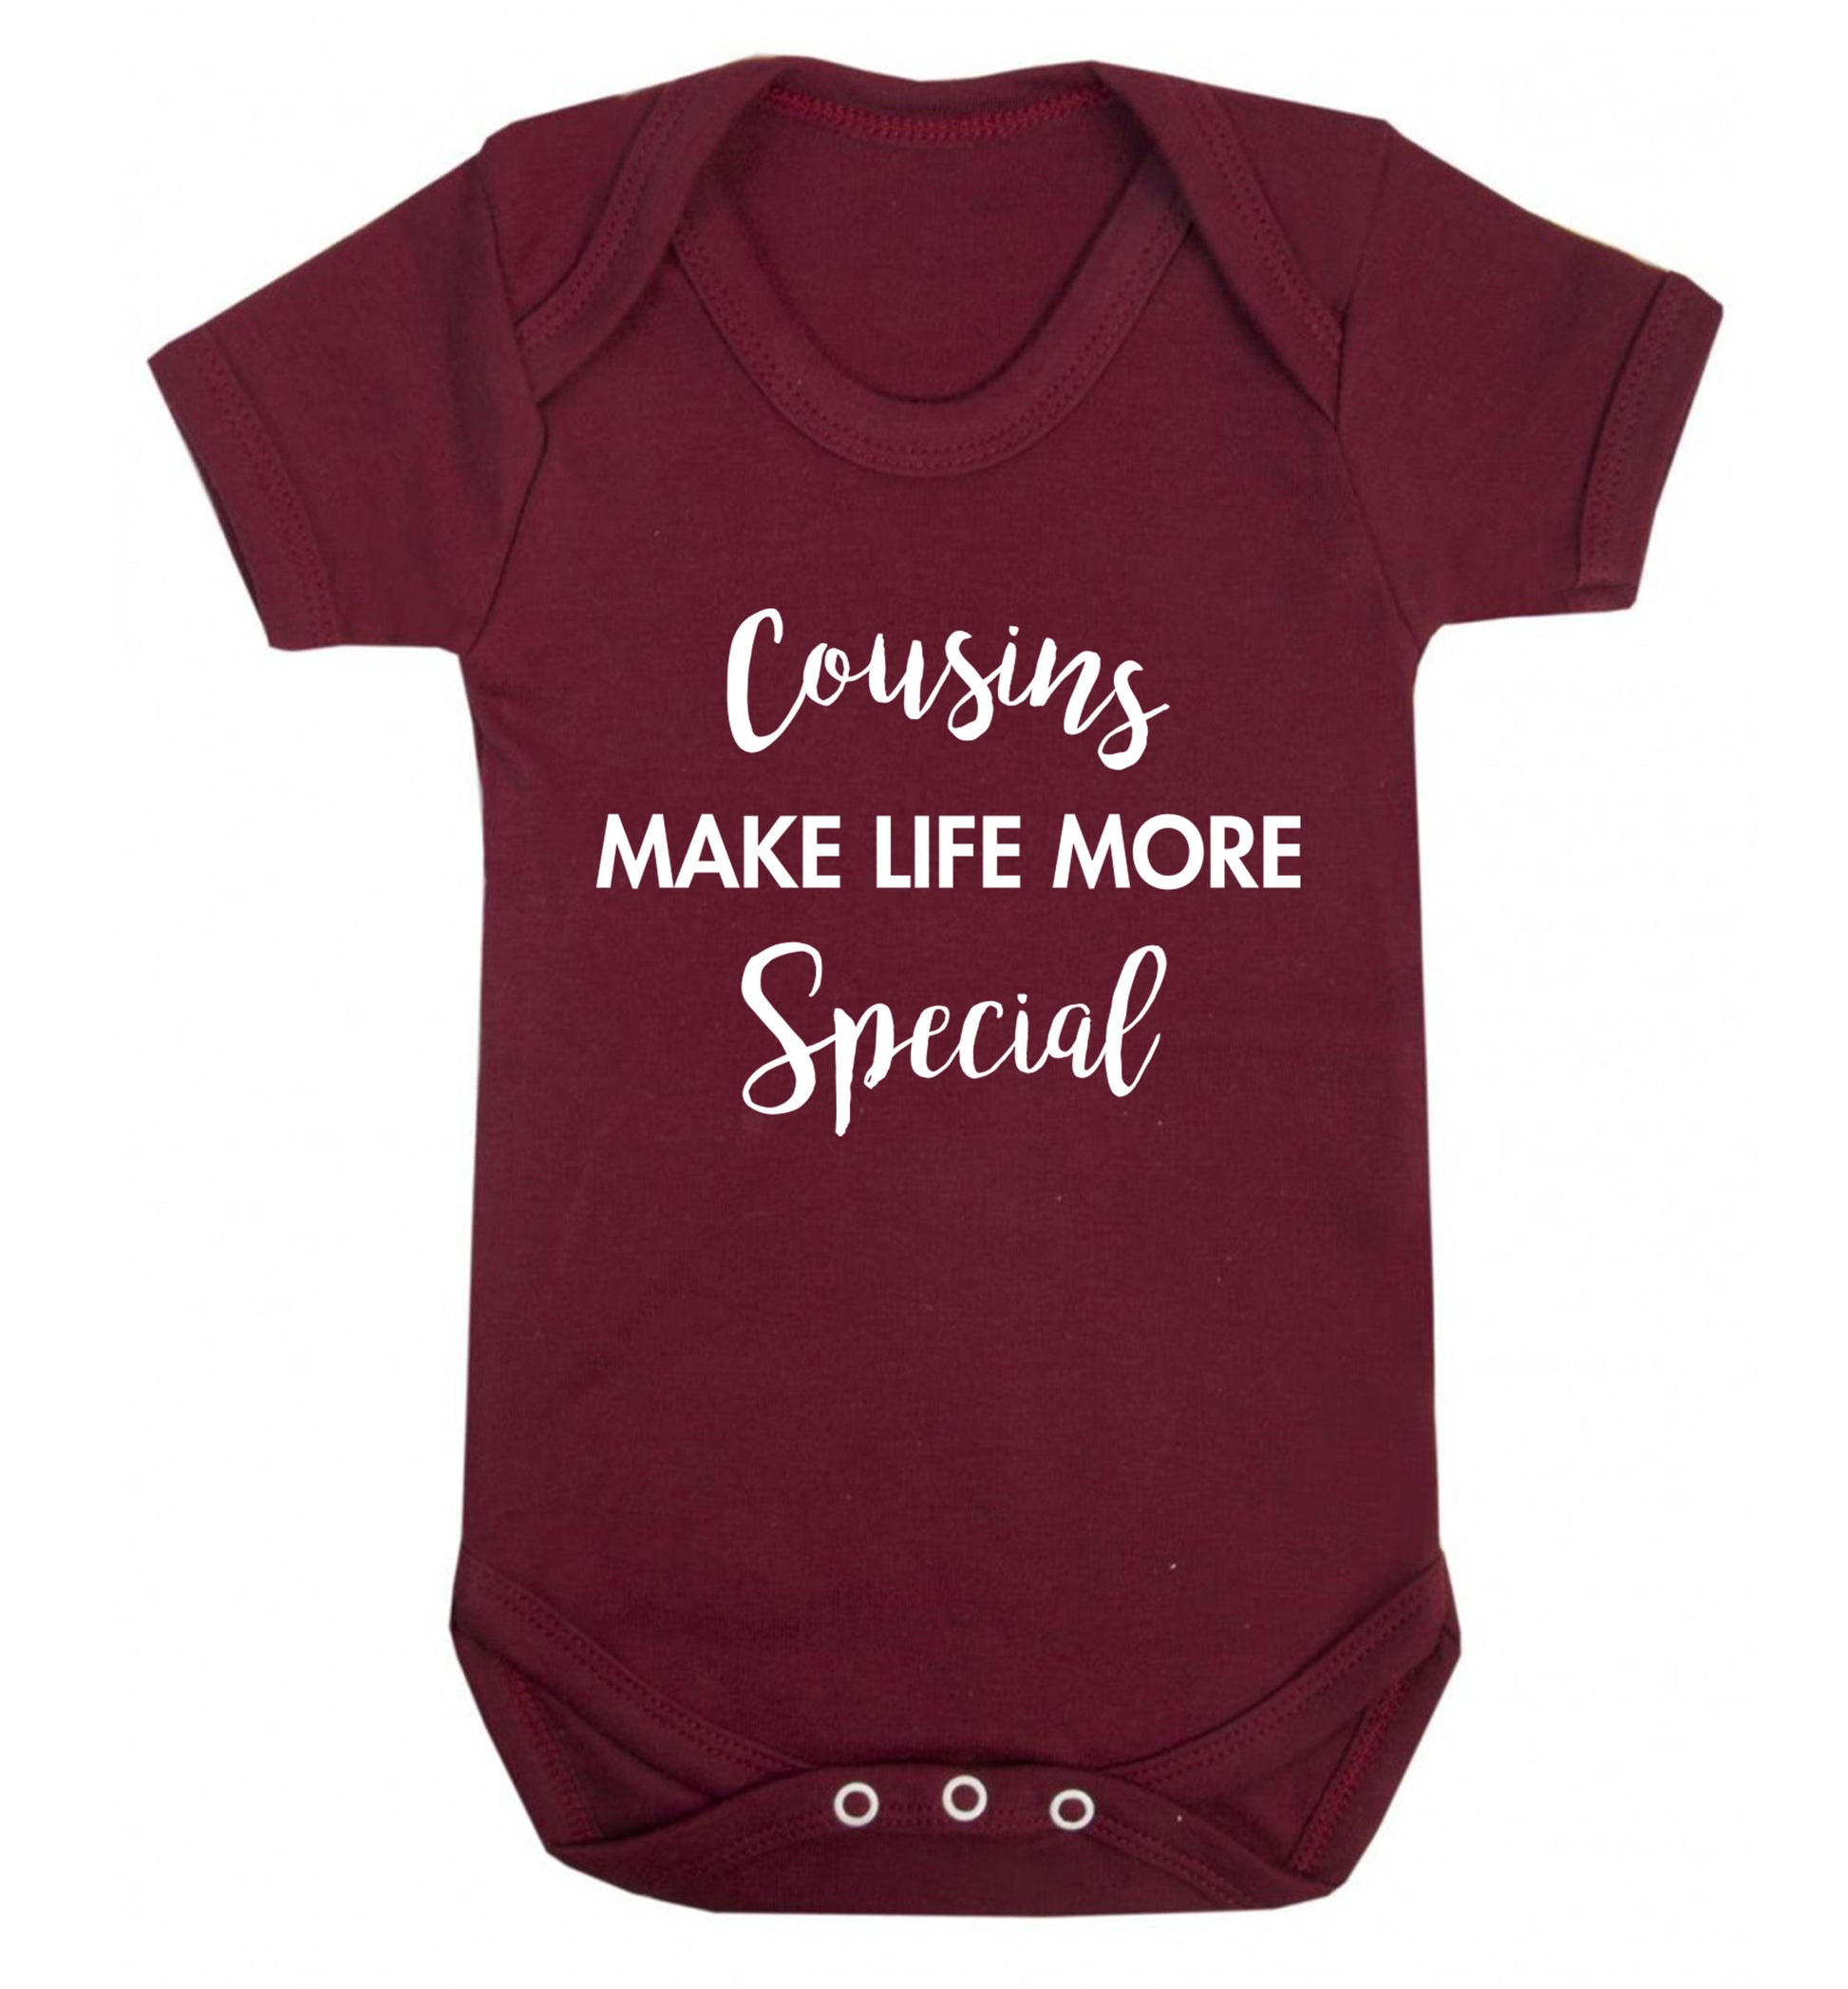 Cousins make life more special Baby Vest maroon 18-24 months